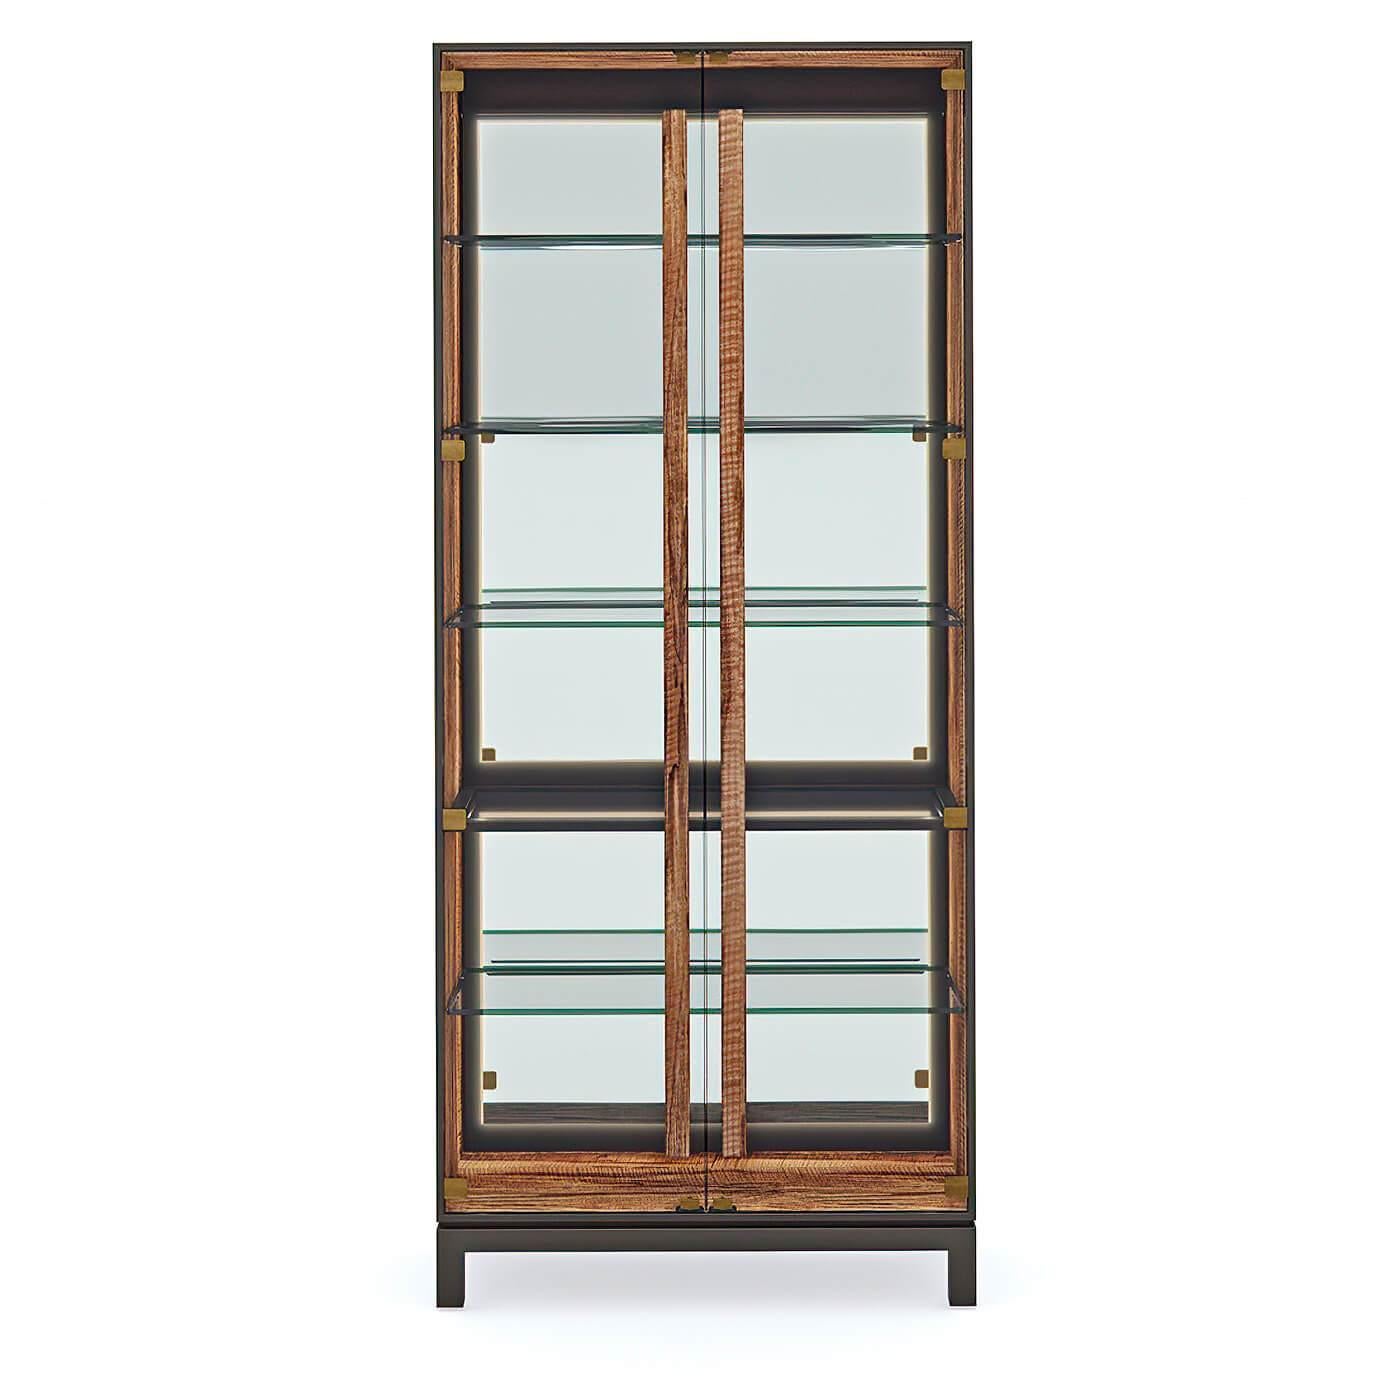 A Mid-Century-style glass door display cabinet illuminates curated displays and collectibles. Finished in Greenway, a complex mix of dark brown, black, and olive tones, the case exterior offers rich contrast to the door handles and interior, with a